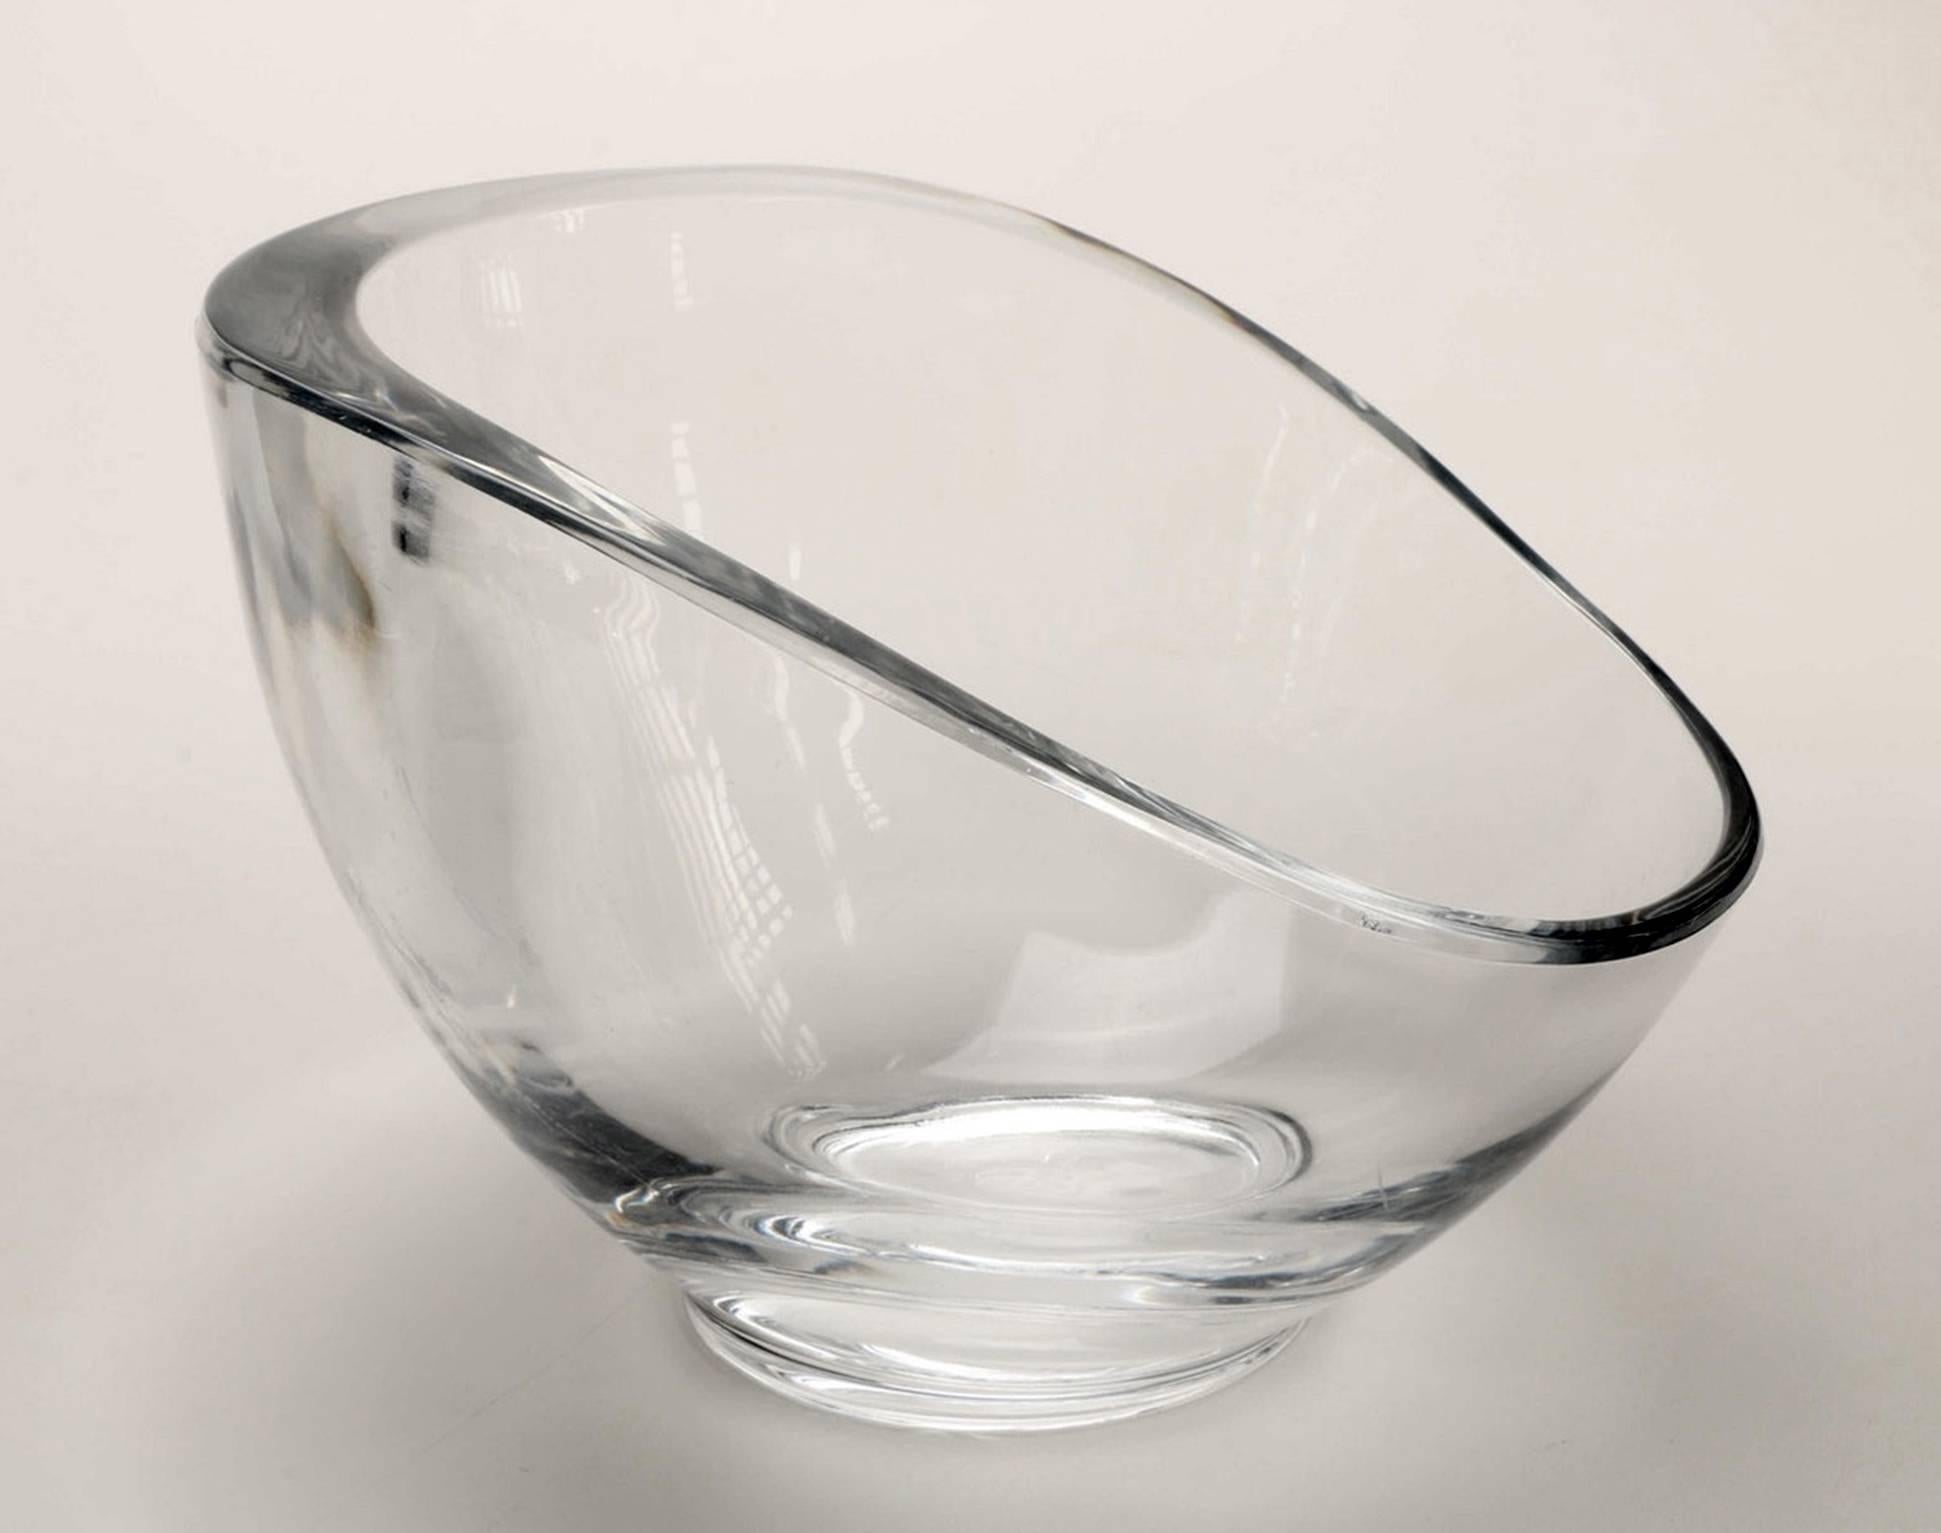 Stunning and beautiful free-form Lucite bowl from the Mid-Century Modern era. The bowl features a biomorphic, asymmetric rim and it is perfect to be used as a salad bowl or decor.

Dimensions
9